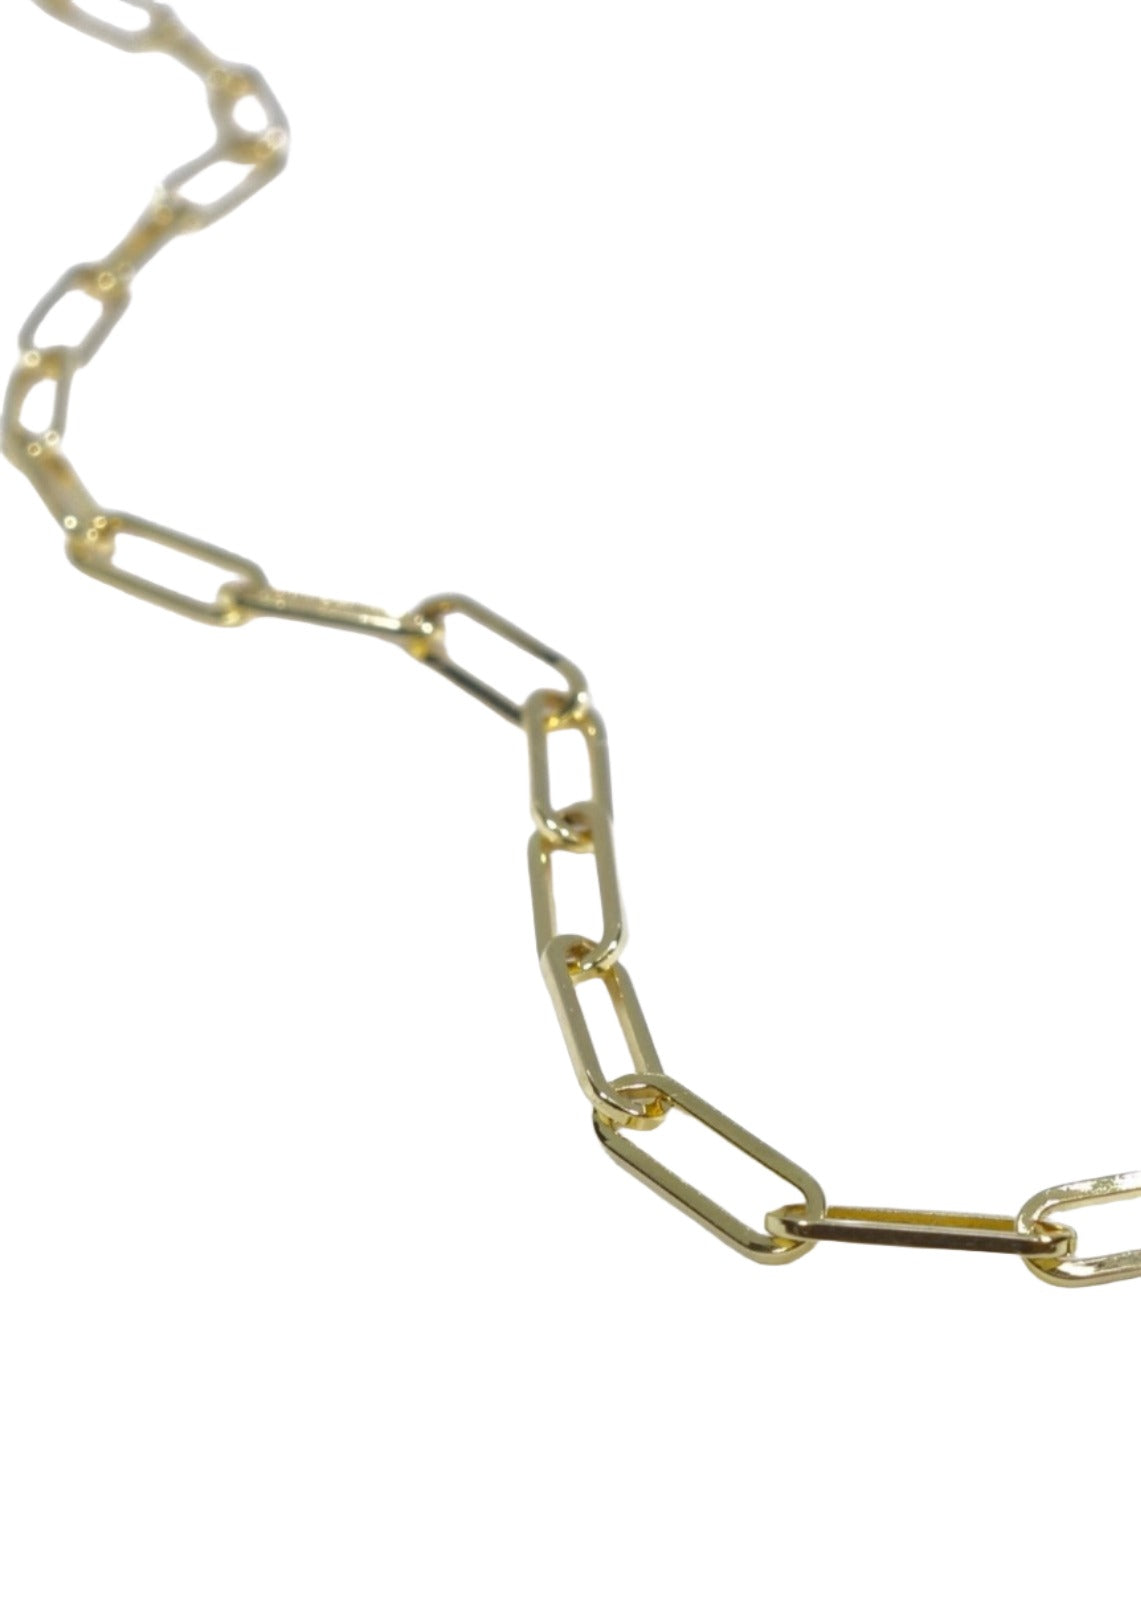 Linked Chain // 14k Gold